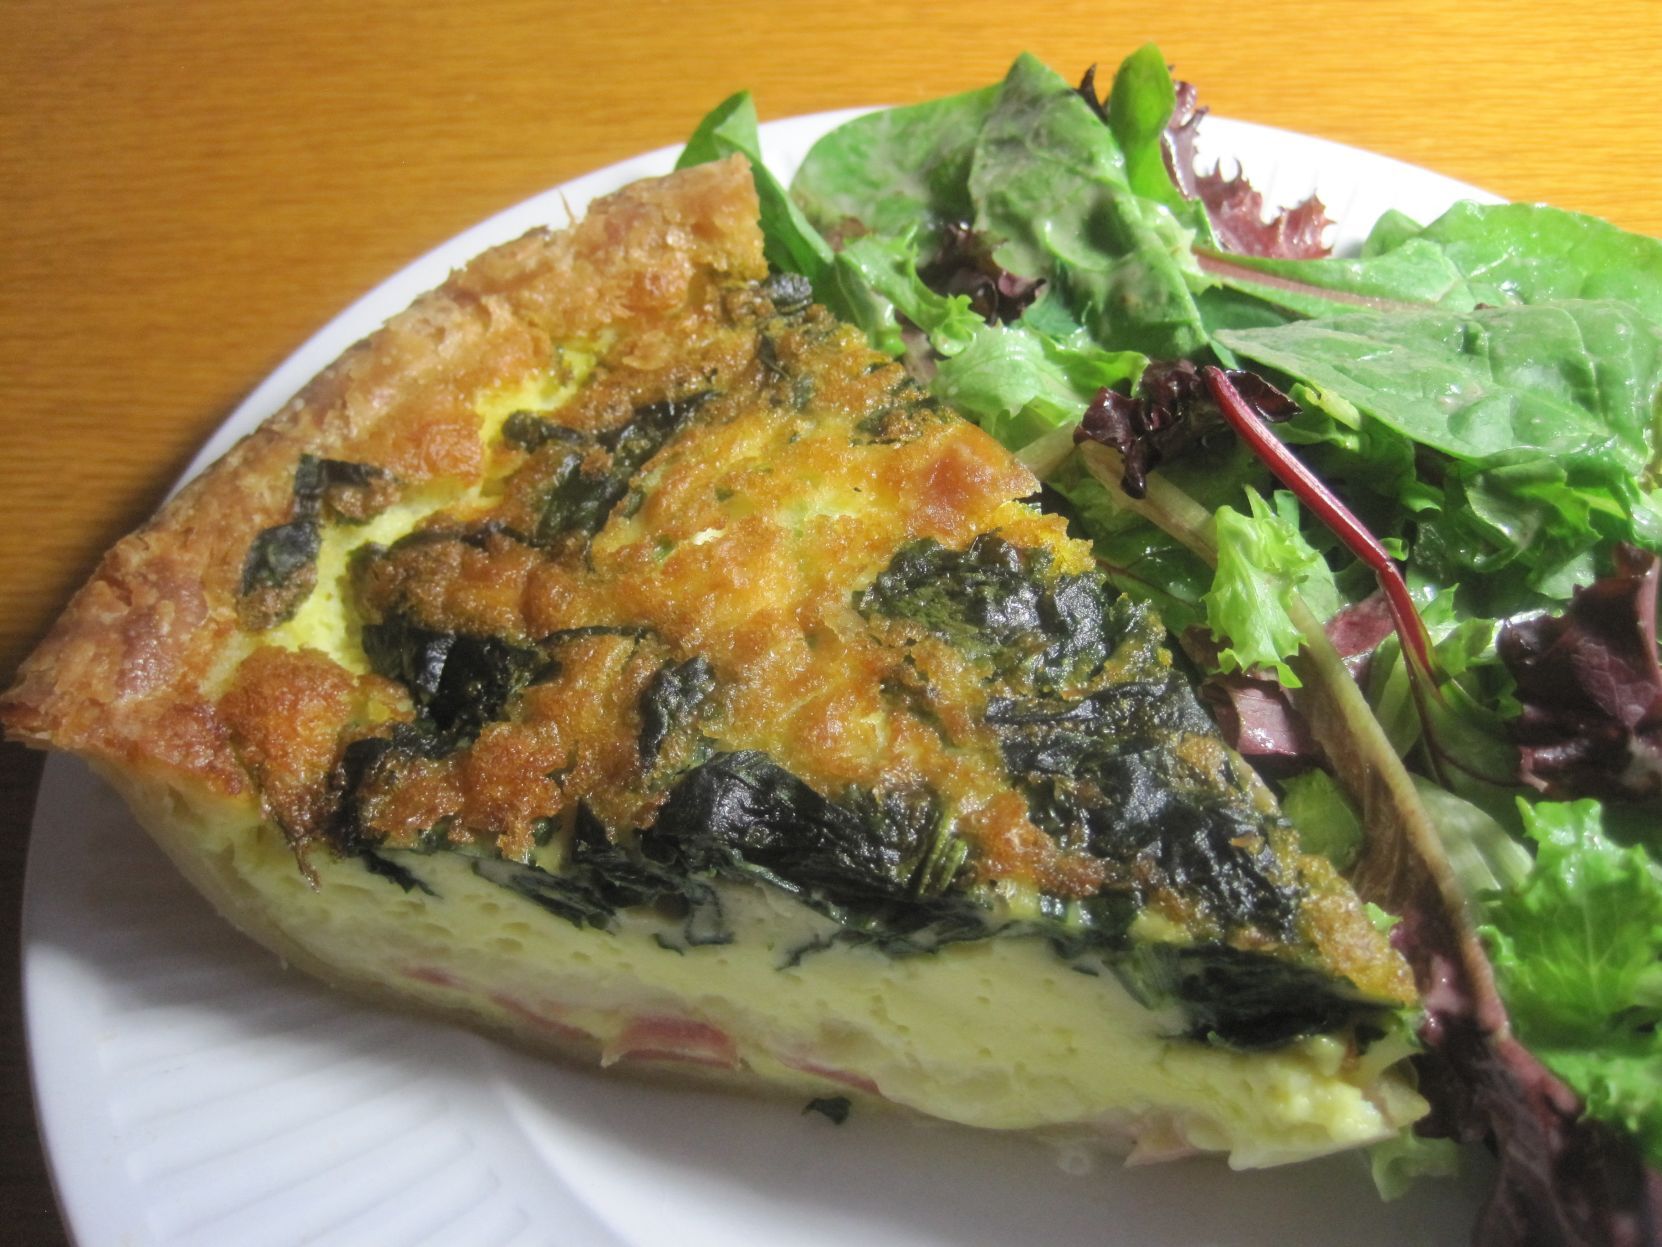 Avenues quiche recipe is ready for your personal touch